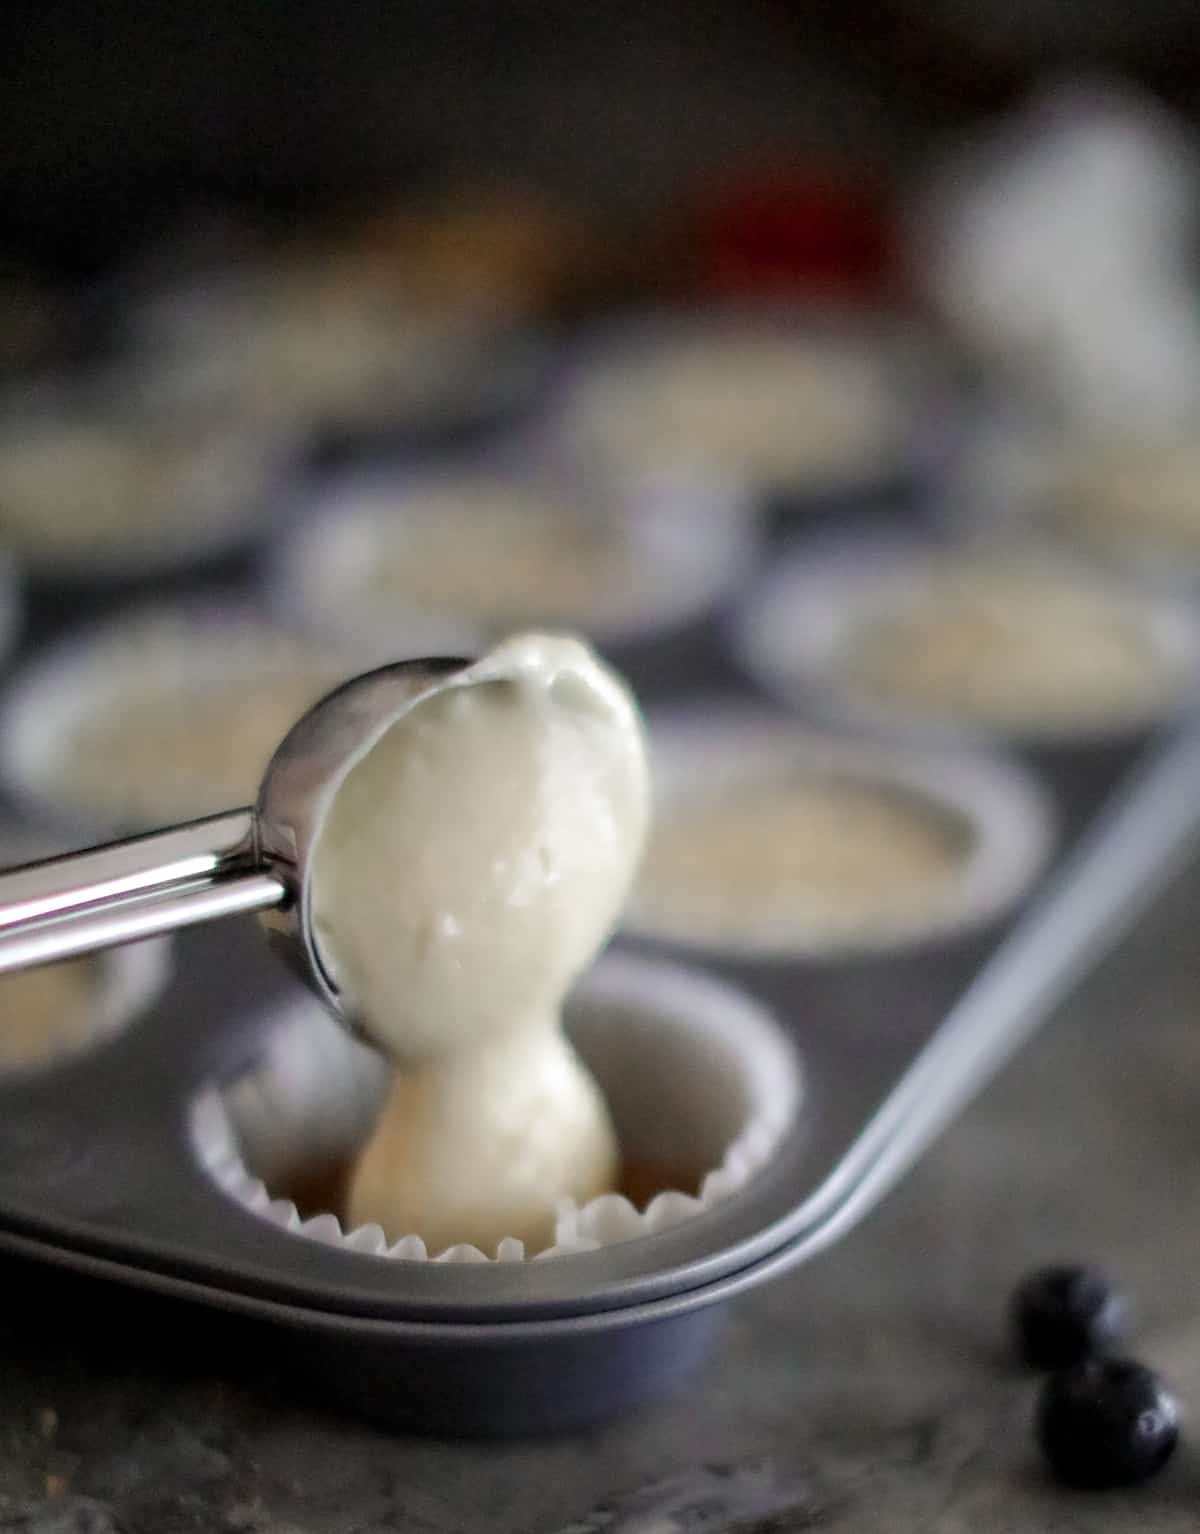 Batter going into muffin cup.